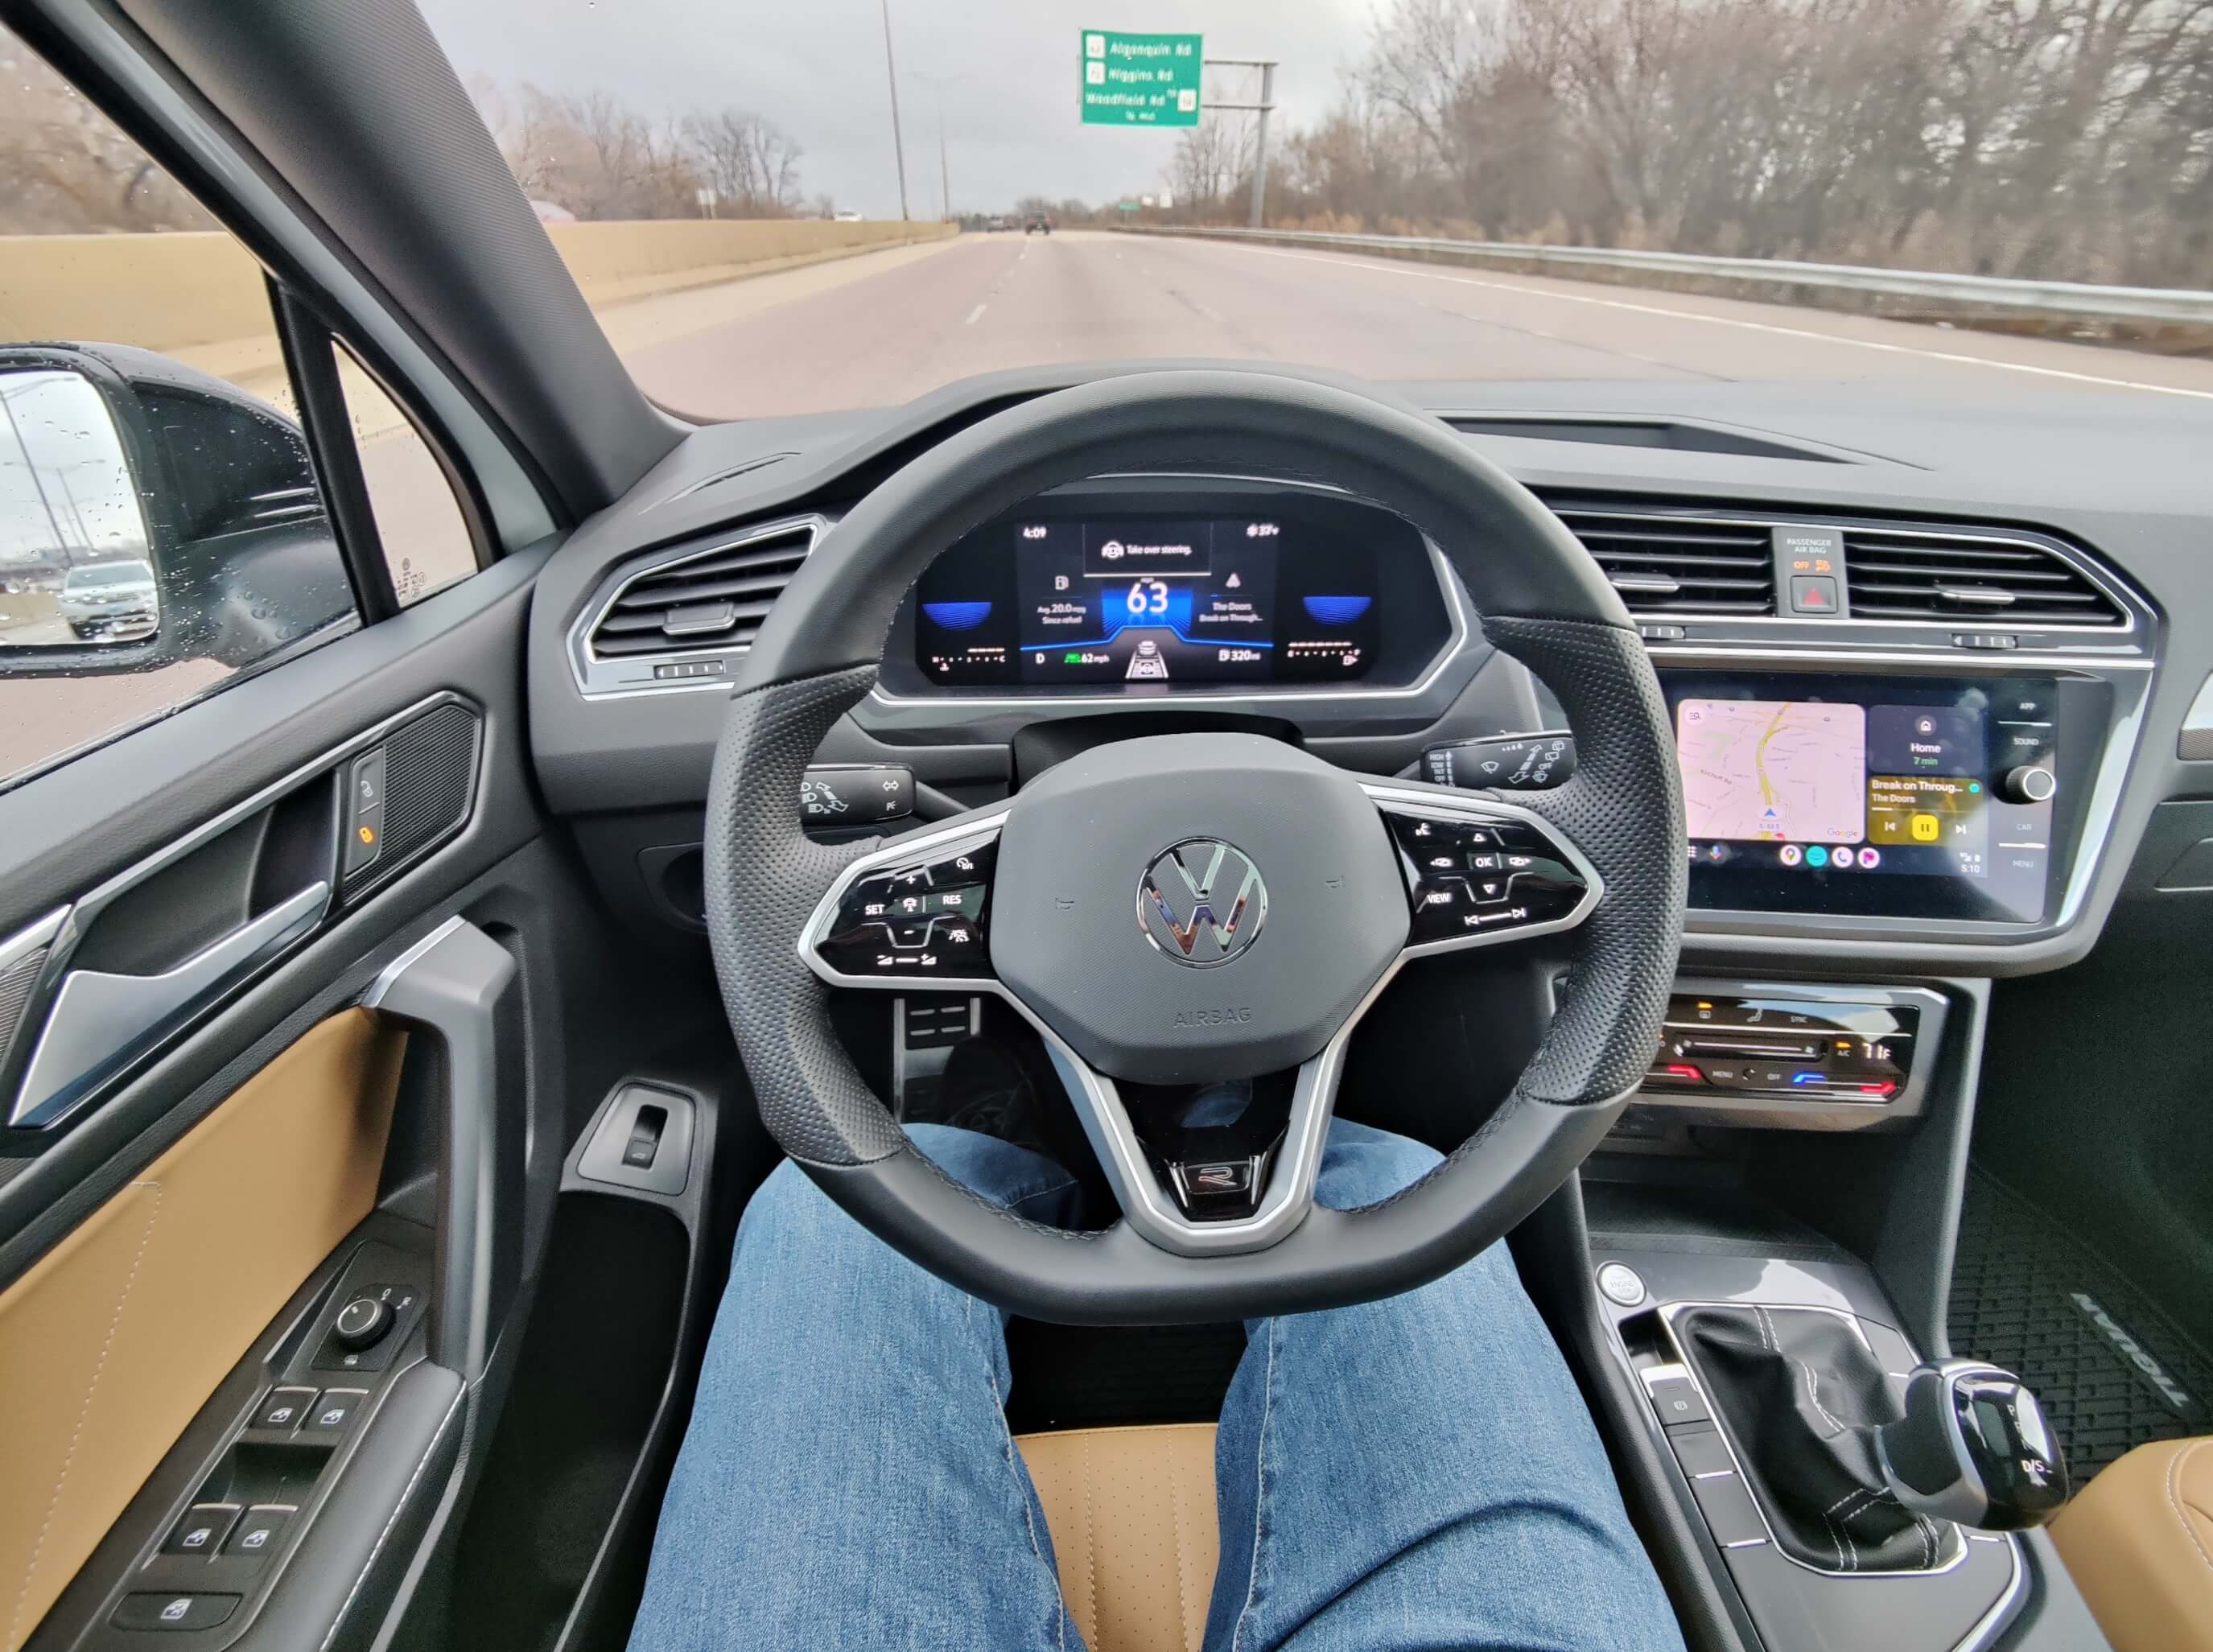 2023 Volkswagen Tiguan SE R-Line Black 3-Row: driving with ADAS & Android Auto projection on the 8.0" Composition touch media display